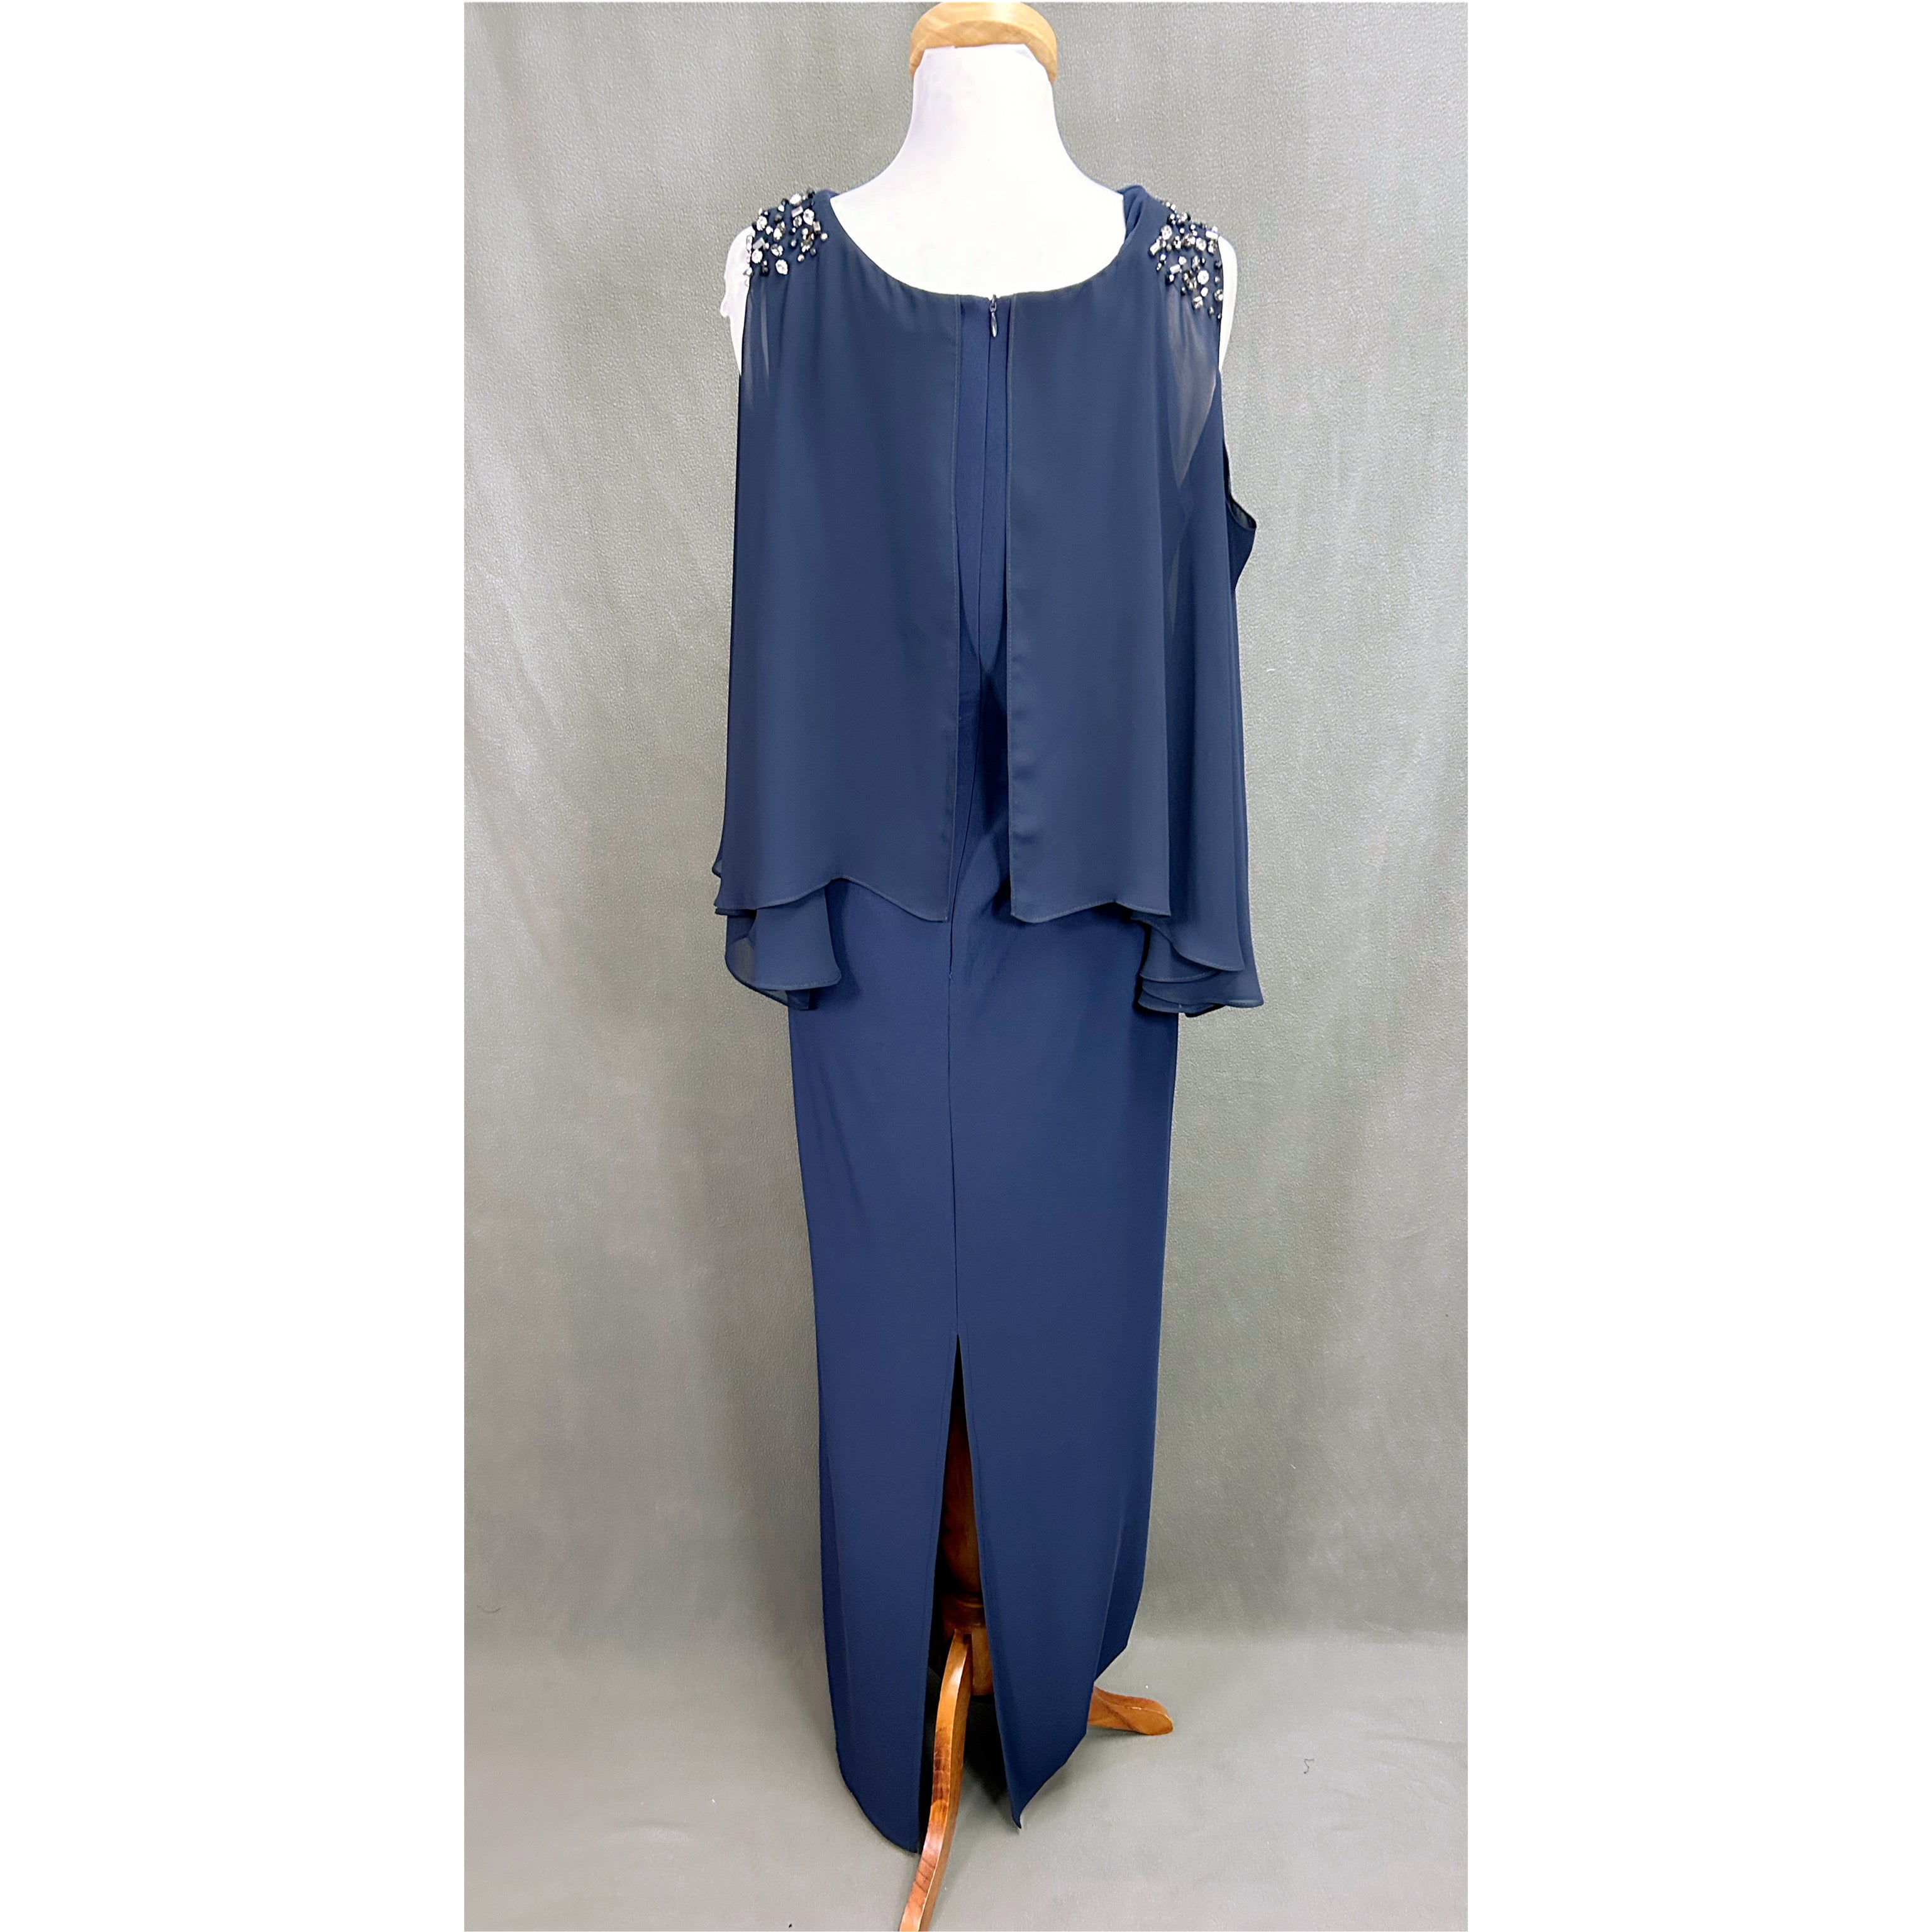 Cartise navy dress, size 10, NEW WITH TAGS!